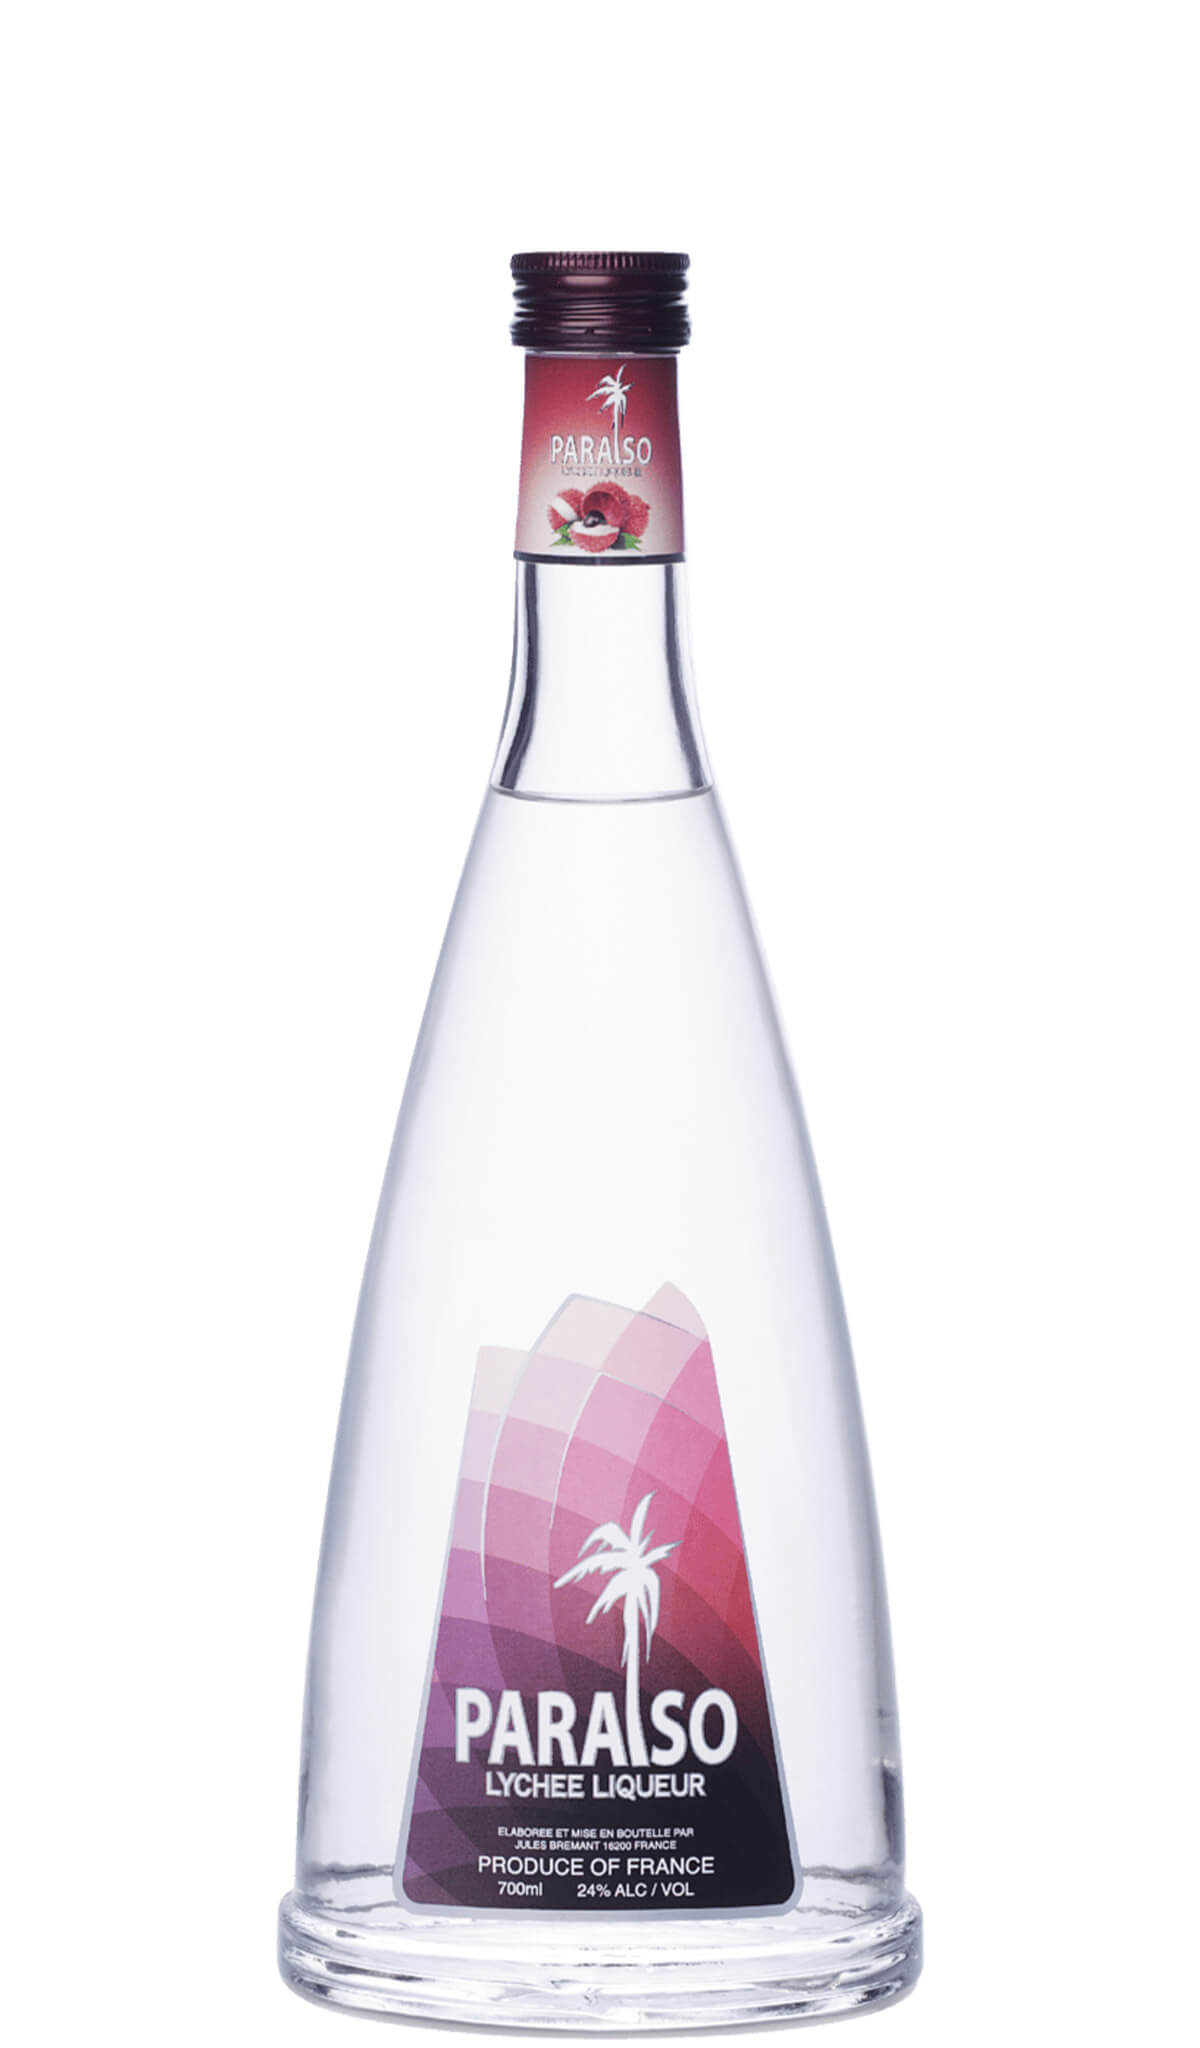 Find out more, explore the range and buy Paraiso Lychee Liqueur 700mL available online at Wine Sellers Direct - Australia's independent liquor specialists.